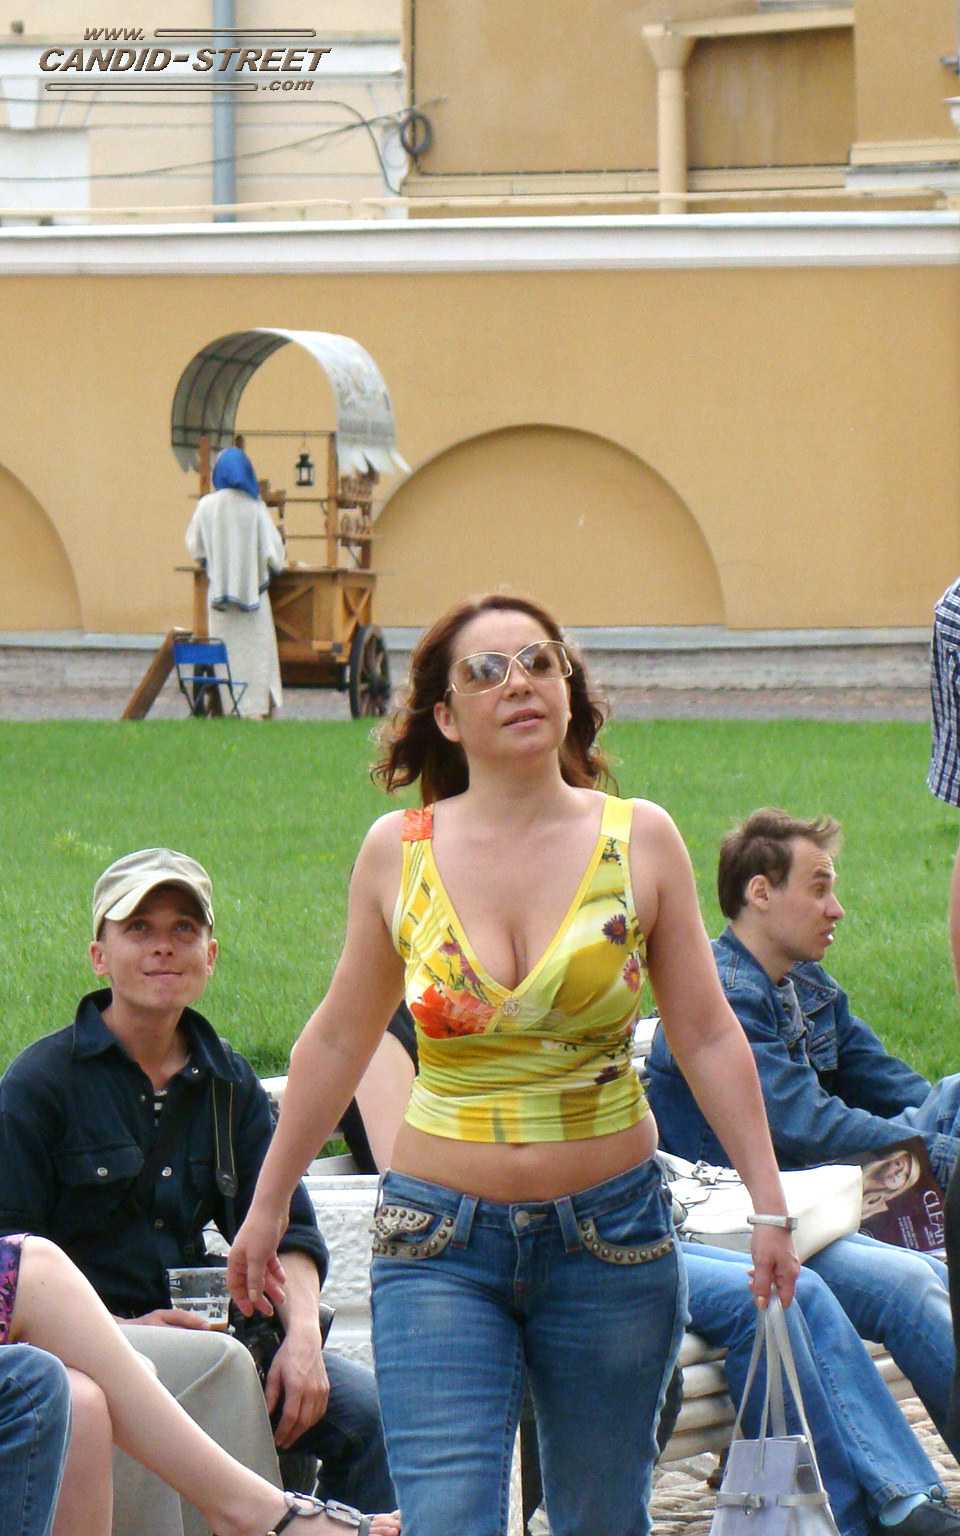 Busty girls candid shots - 14-dsc06622 from Candid Street